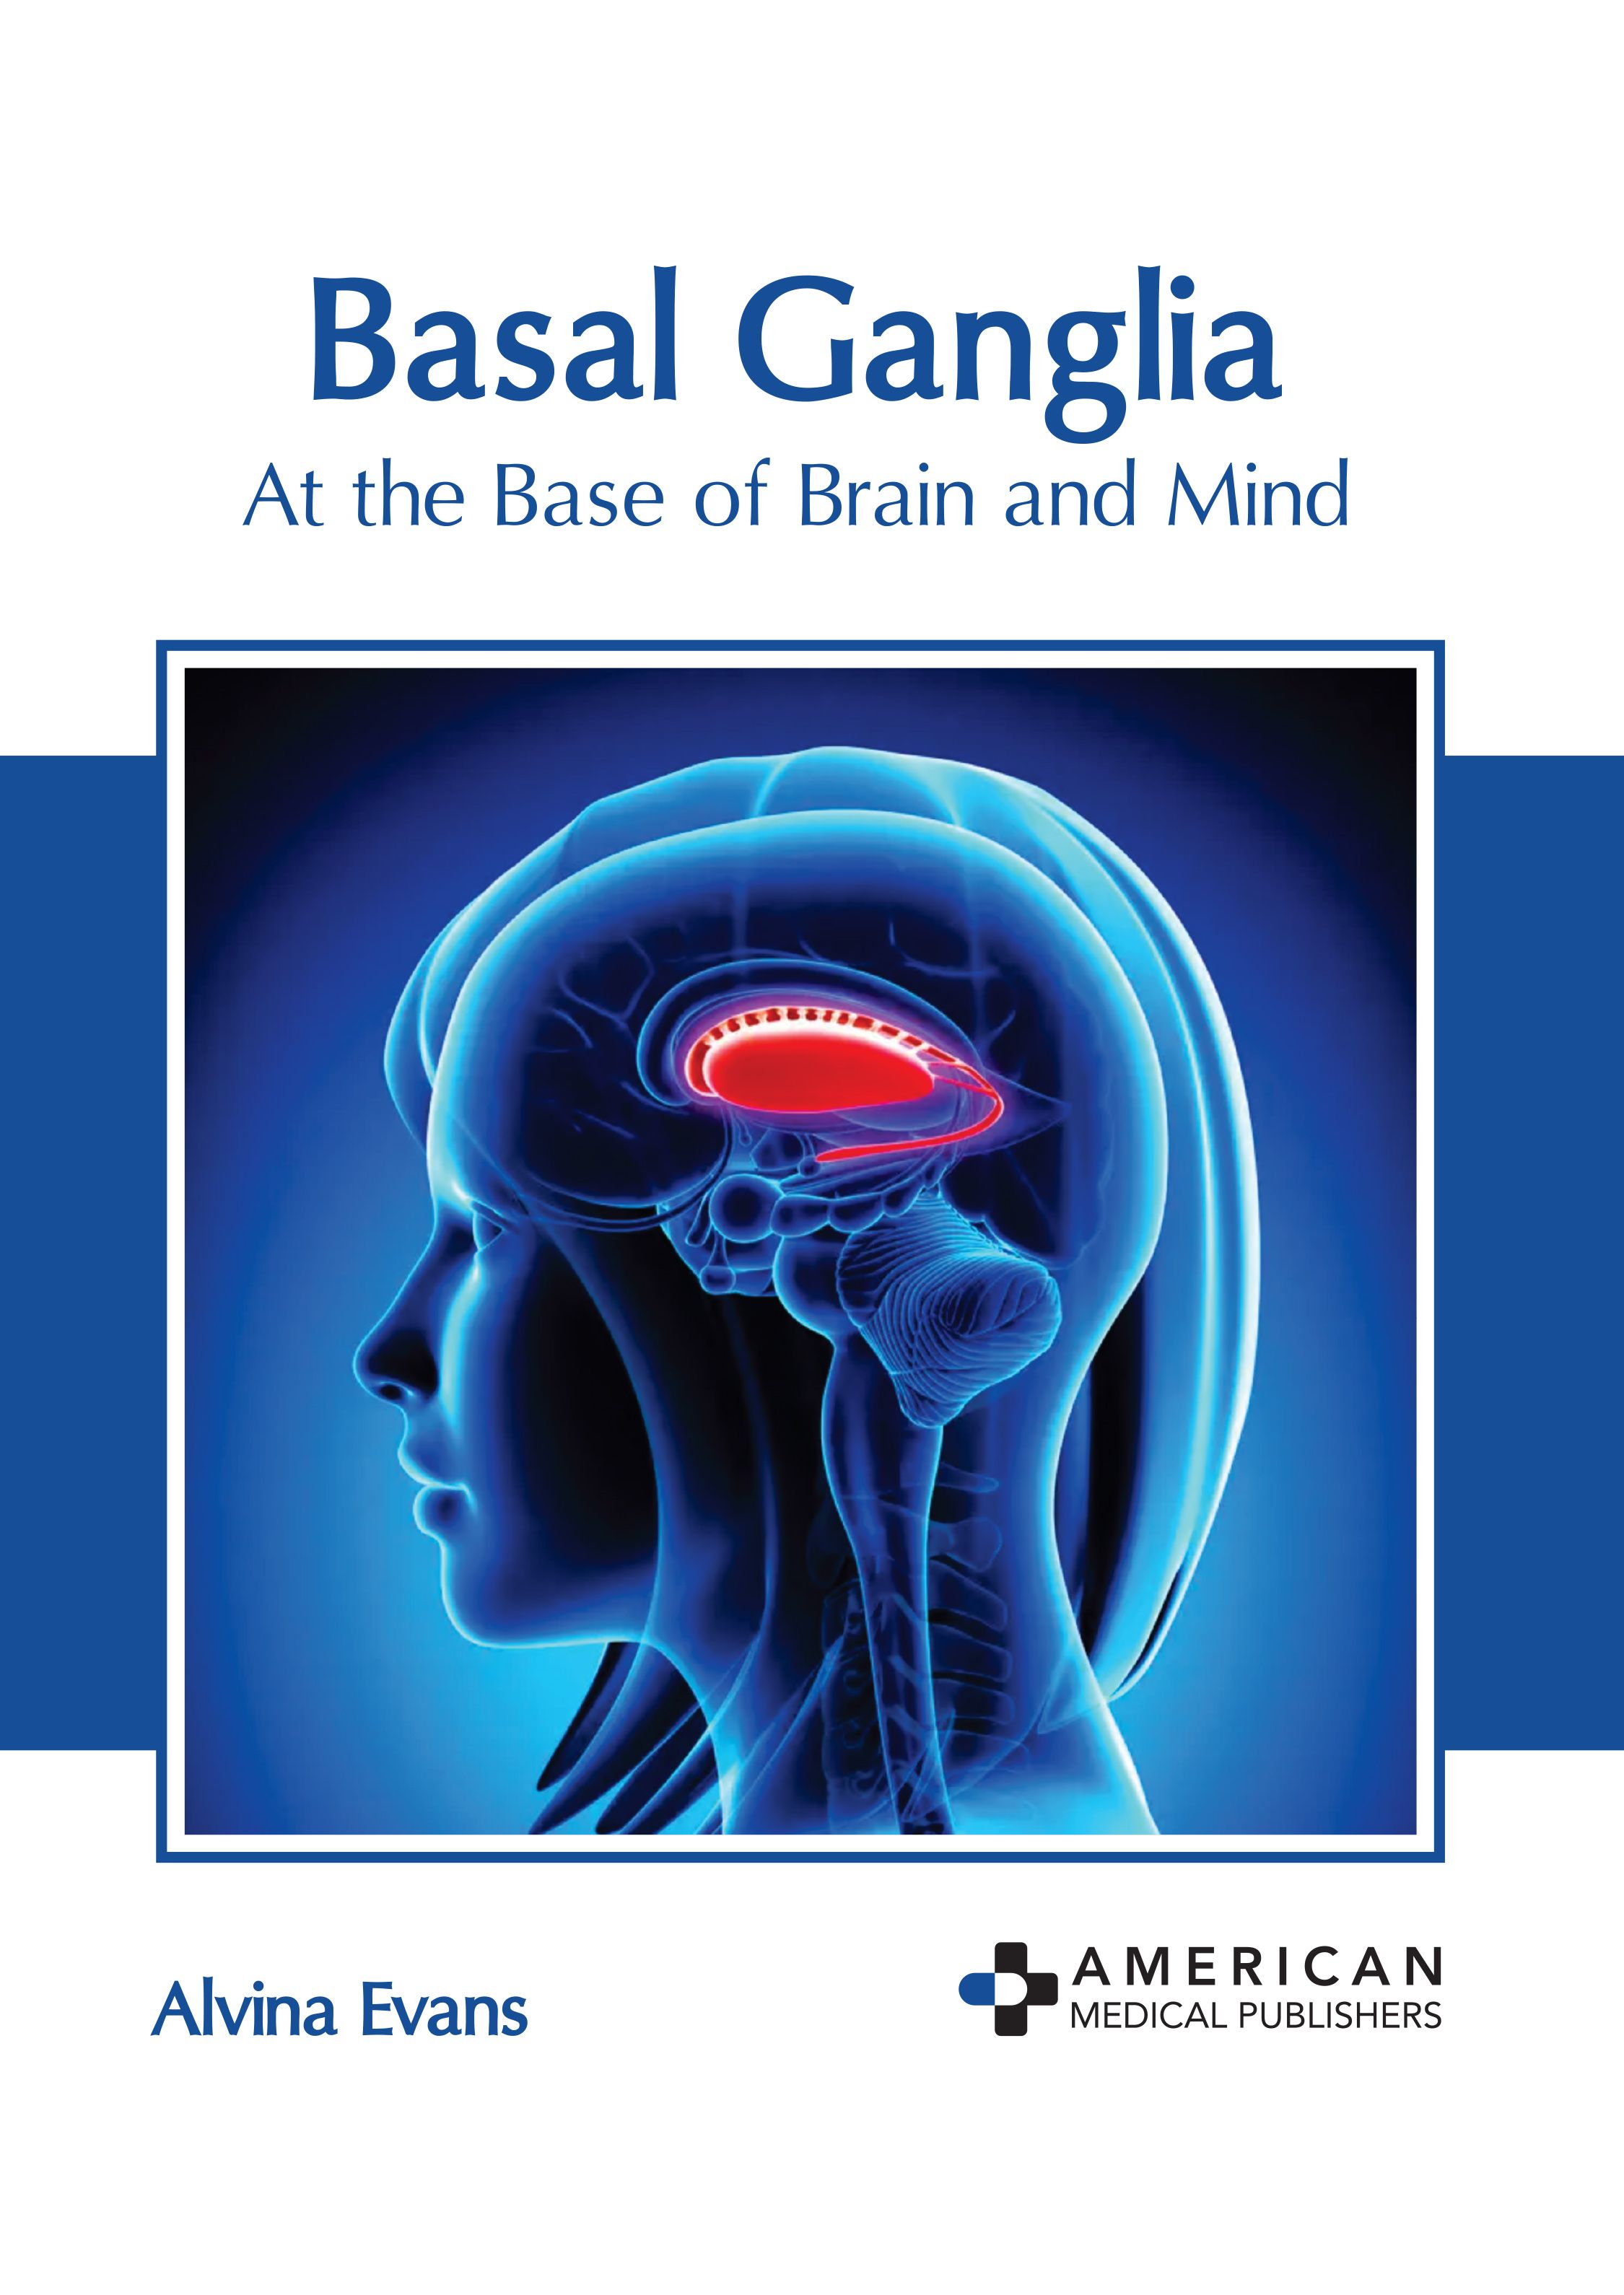 BASAL GANGLIA: AT THE BASE OF BRAIN AND MIND